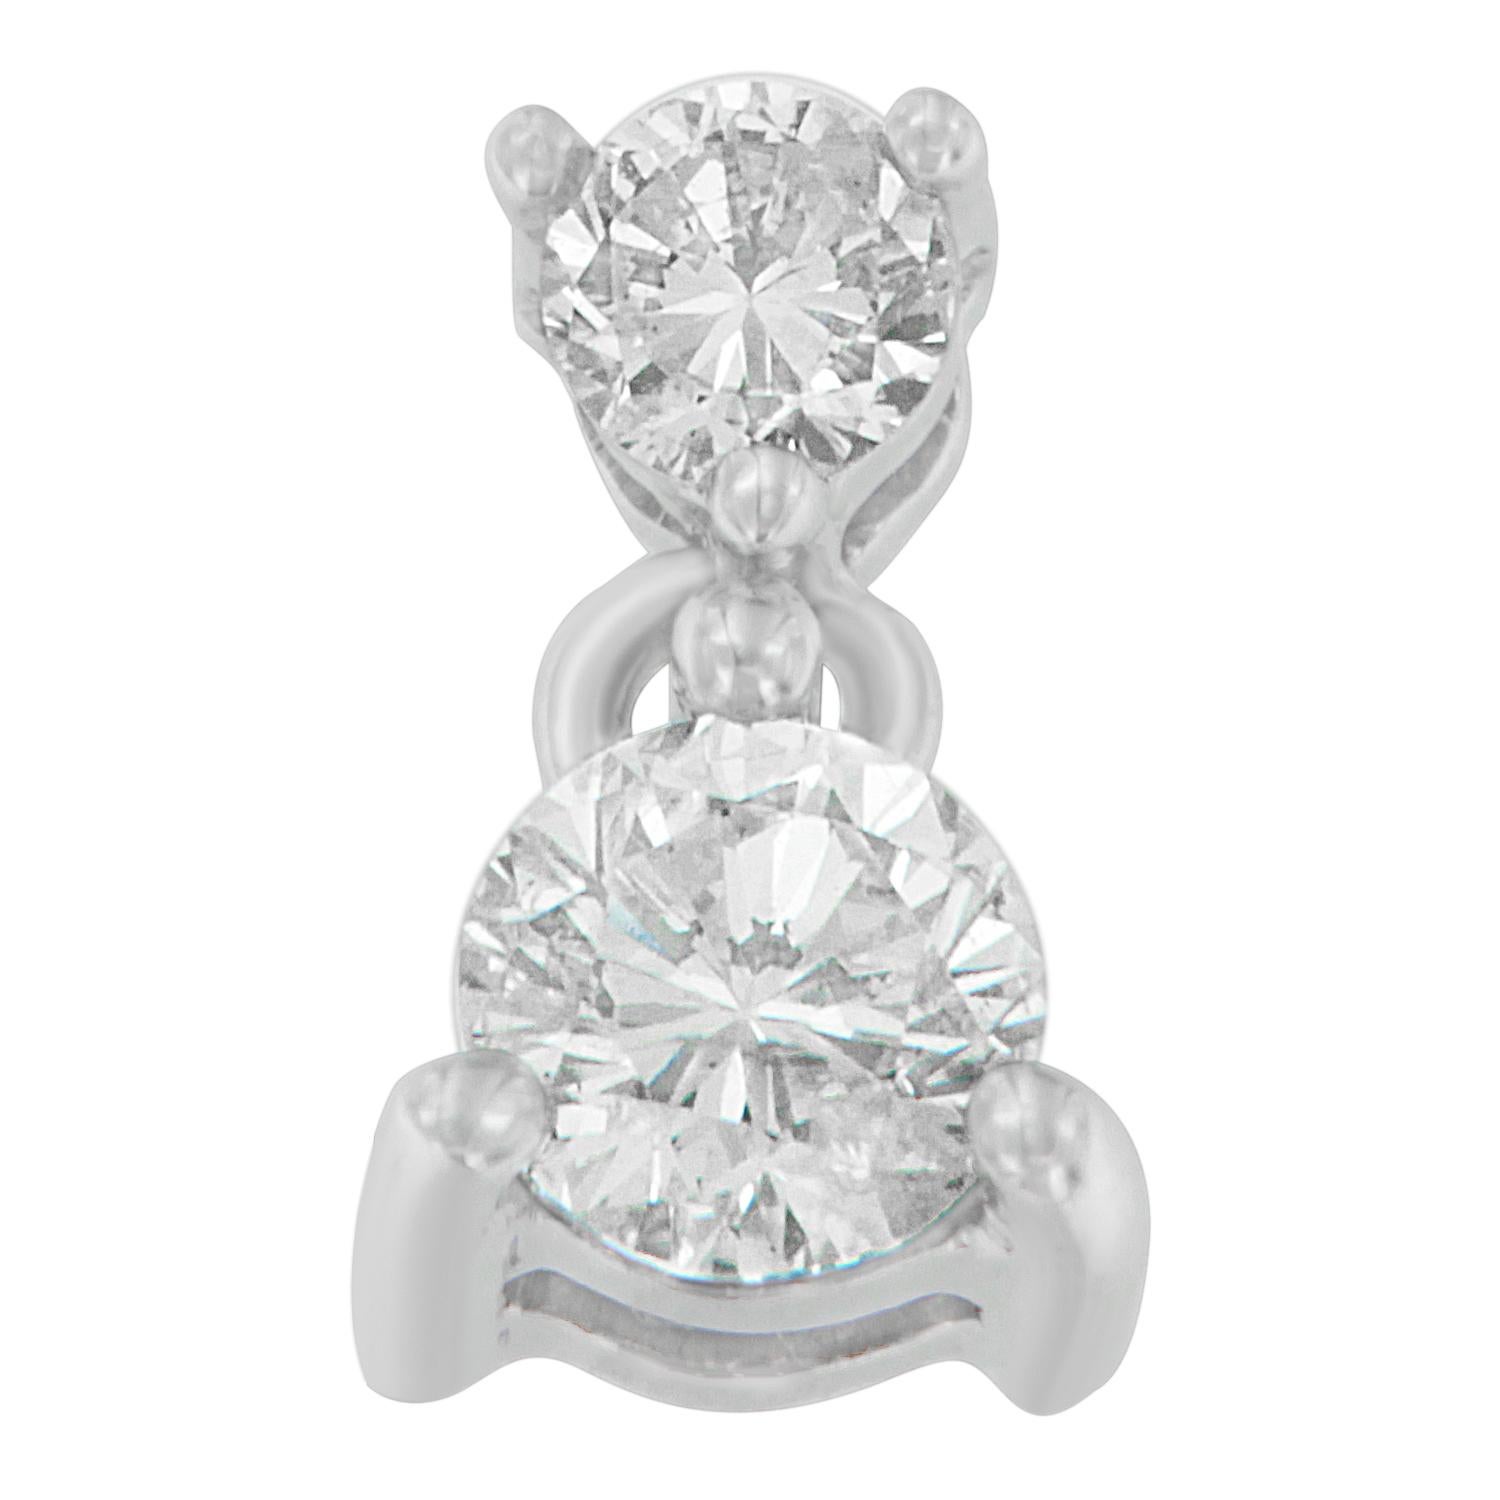 Keep your adorable little girl close to your heart with this elegant diamond pendant. This little piece of jewel sparkles in half a karat of round cut diamonds that are prong set in 14 karats white gold. Polished high to shine, it comes with box